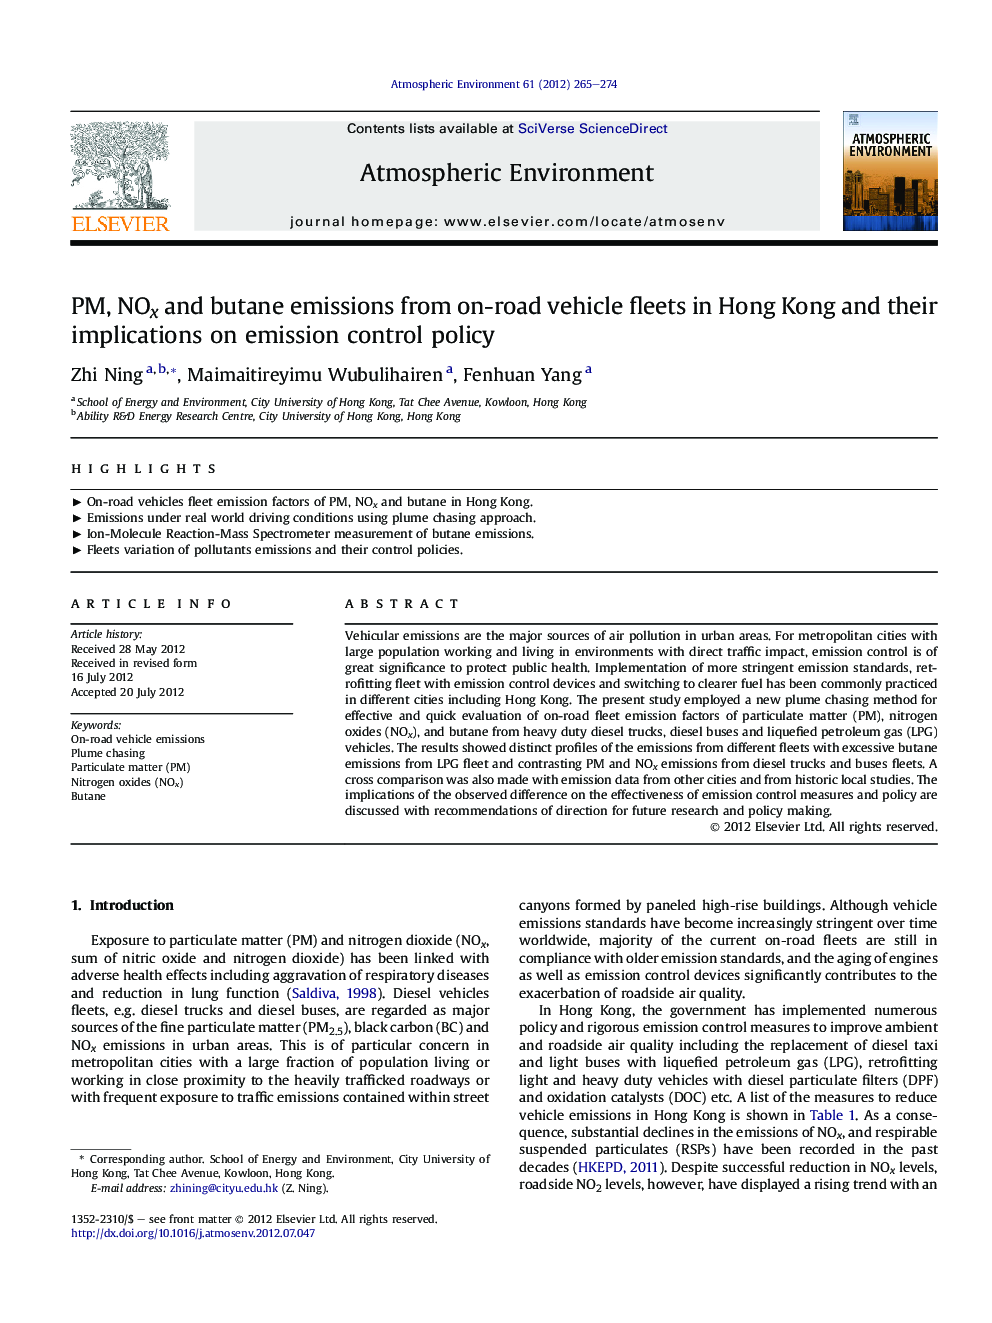 PM, NOx and butane emissions from on-road vehicle fleets in Hong Kong and their implications on emission control policy